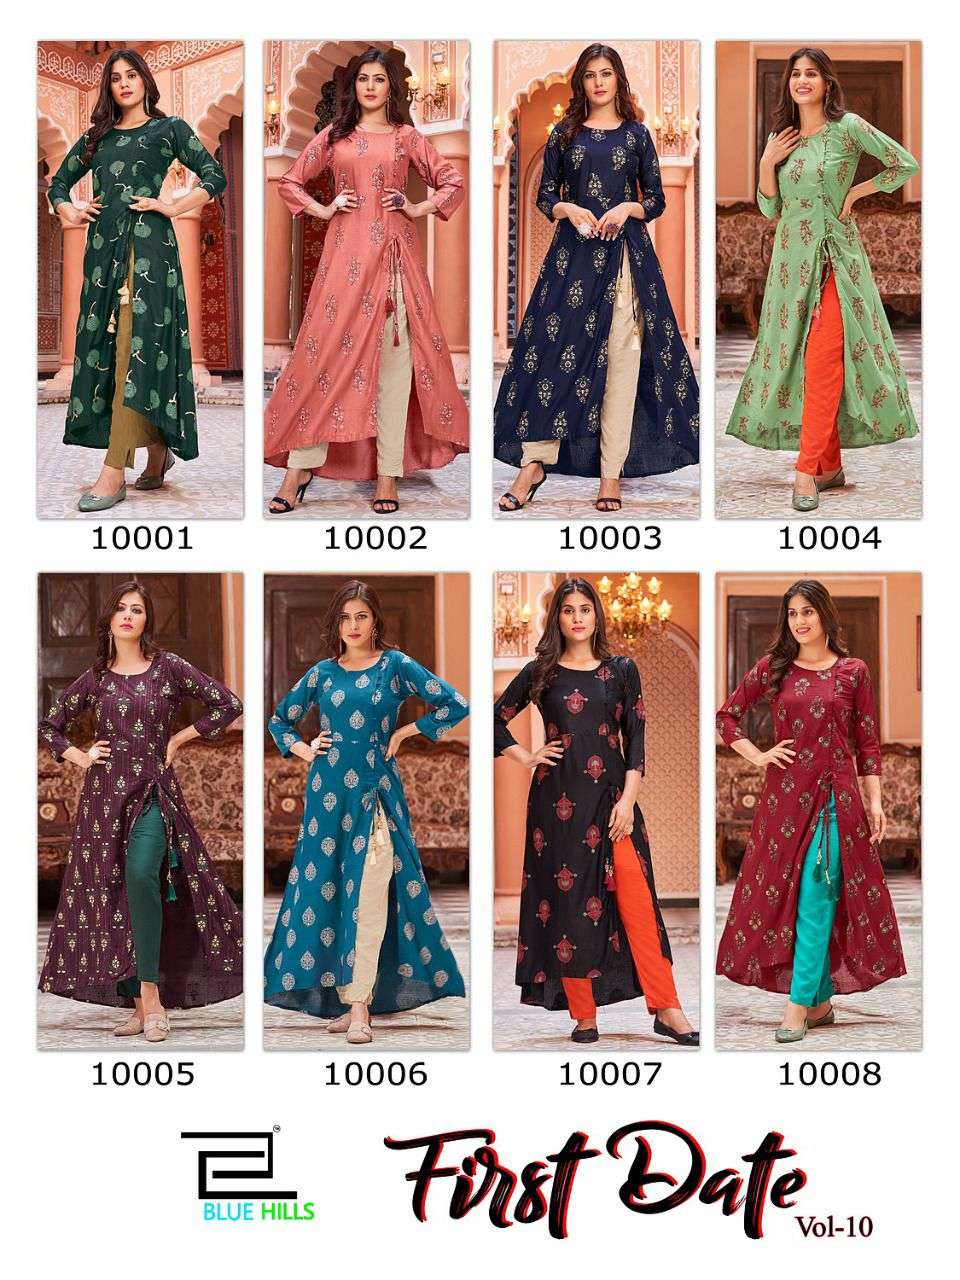 bluehills first date vol-10 10001-10008 series rayon up-dowon midi side cut dress collection wholesale price 